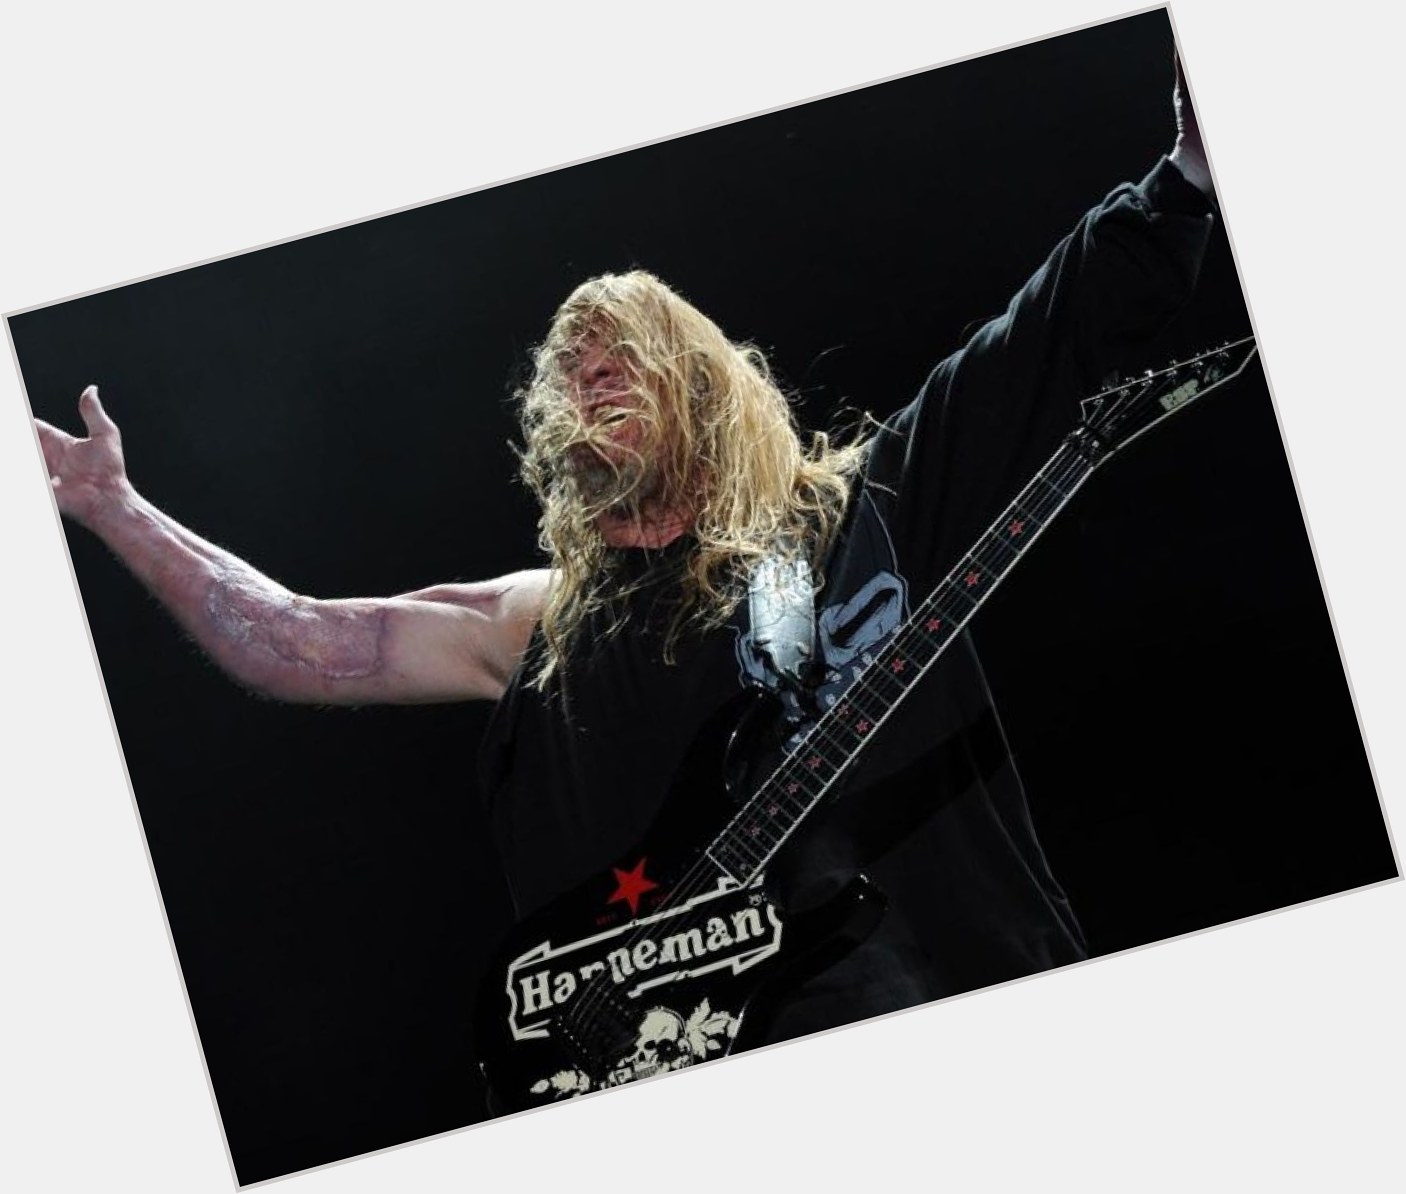 Today would have been Jeff Hanneman\s 58th Birthday. Happy Birthday Sir - Your songs, riffs, etc will live forever. 